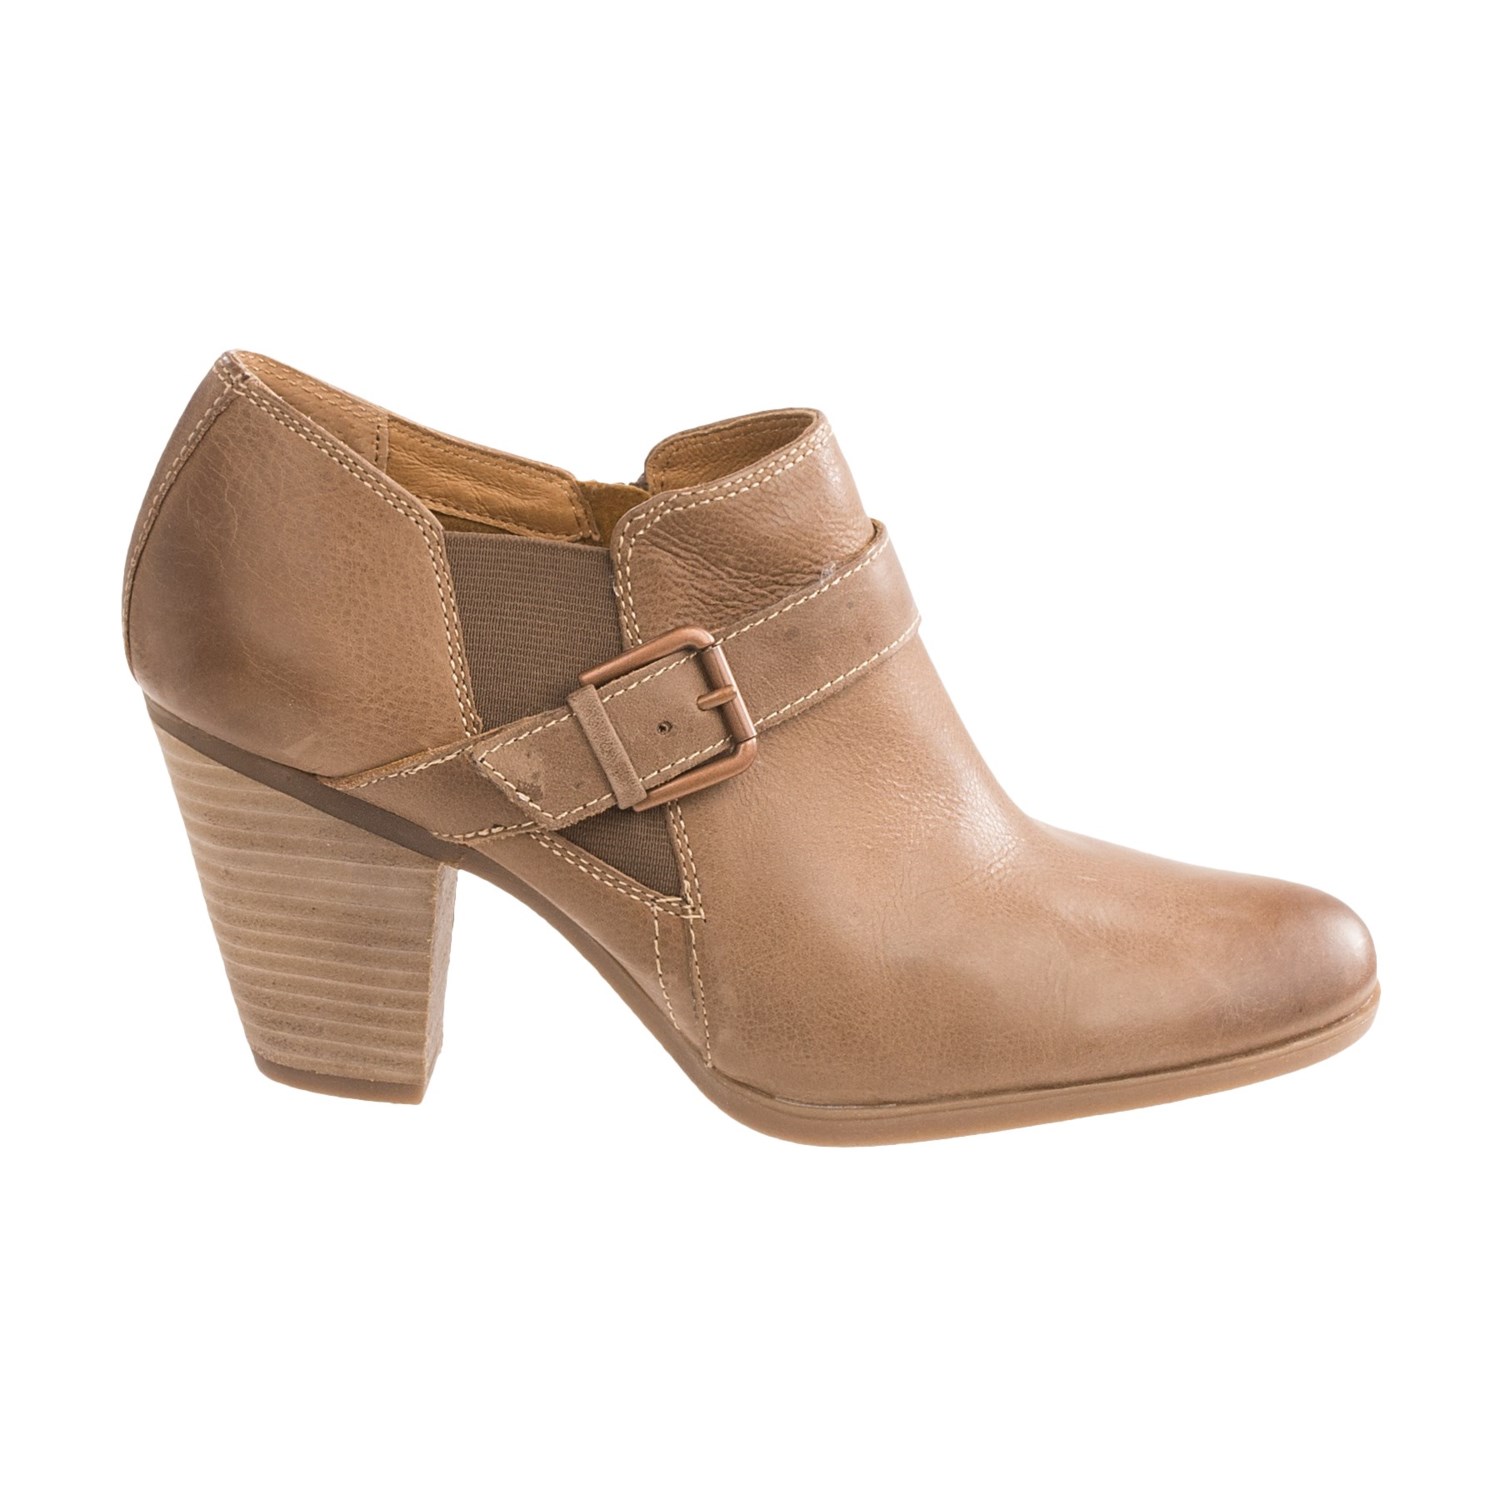 Sofft Nell Ankle Boots (For Women) 7263A - Save 75%